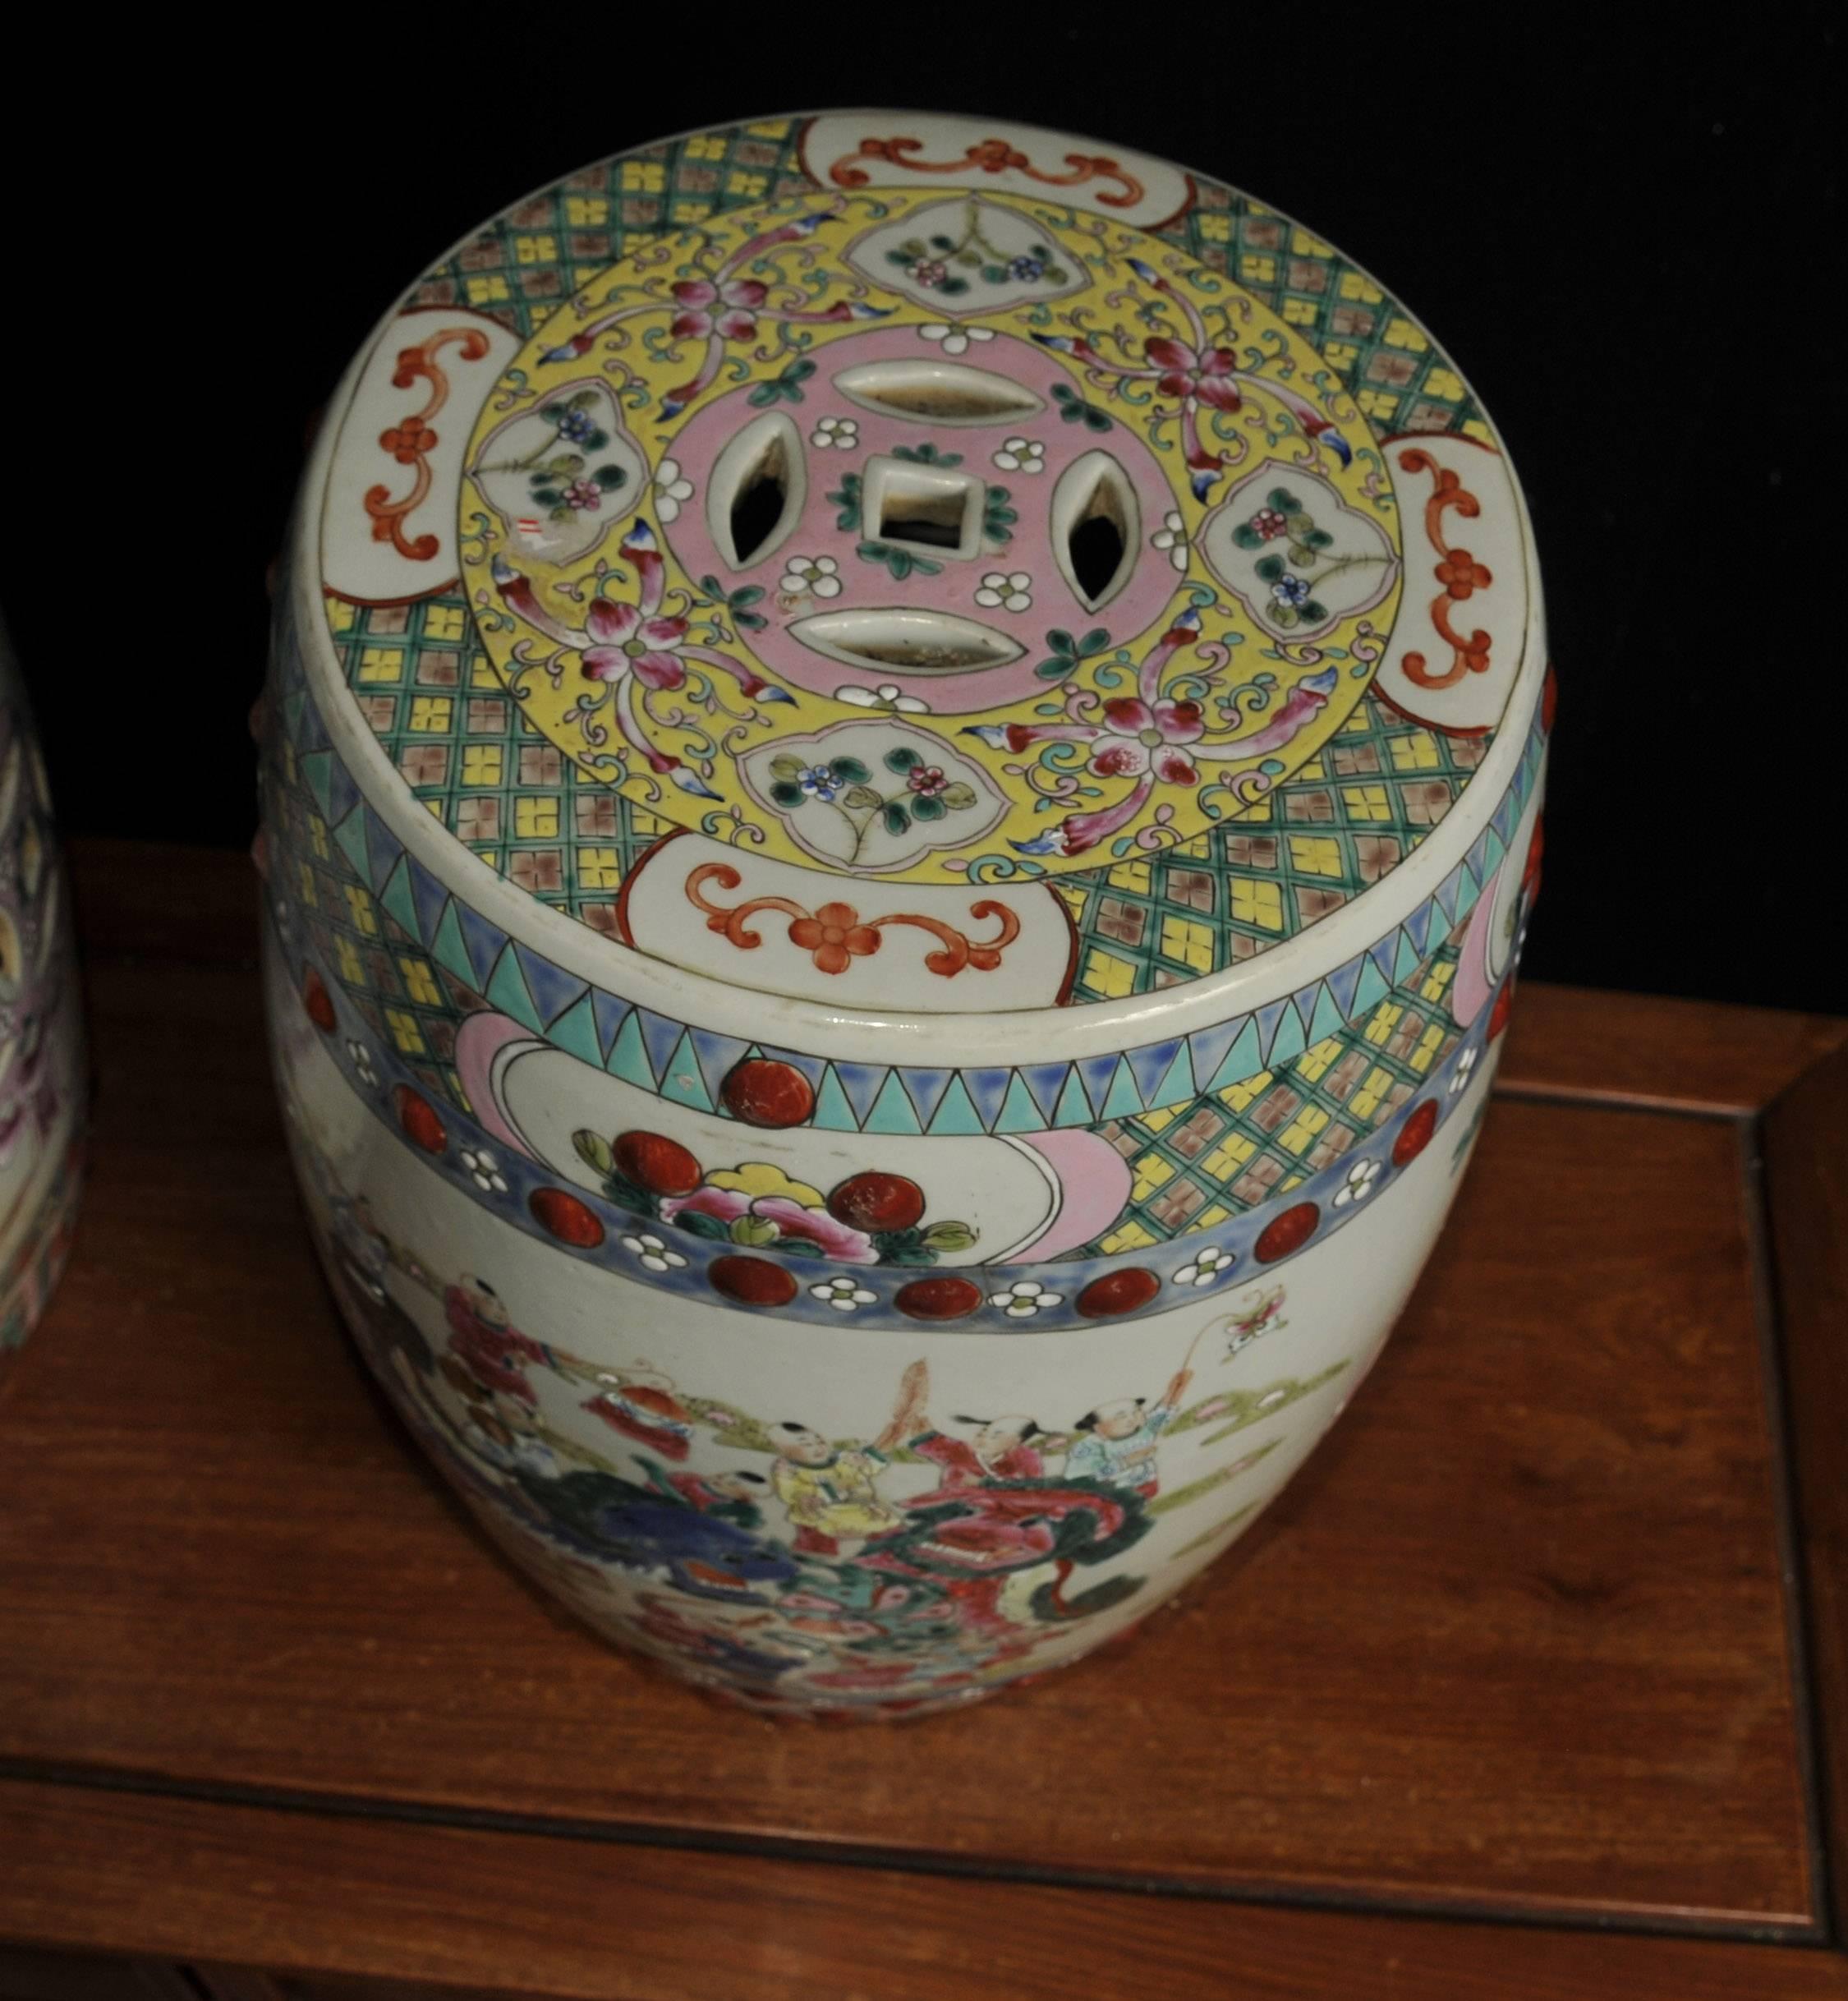 Gorgeous pair of Chinese Kangxi style porcelain garden seats or stools.
Elegant pair, every interior designers dream.
hand-painted with exquisite details including dragons, Chinese figurines and arabesques.
Great decorative pair or can be used as